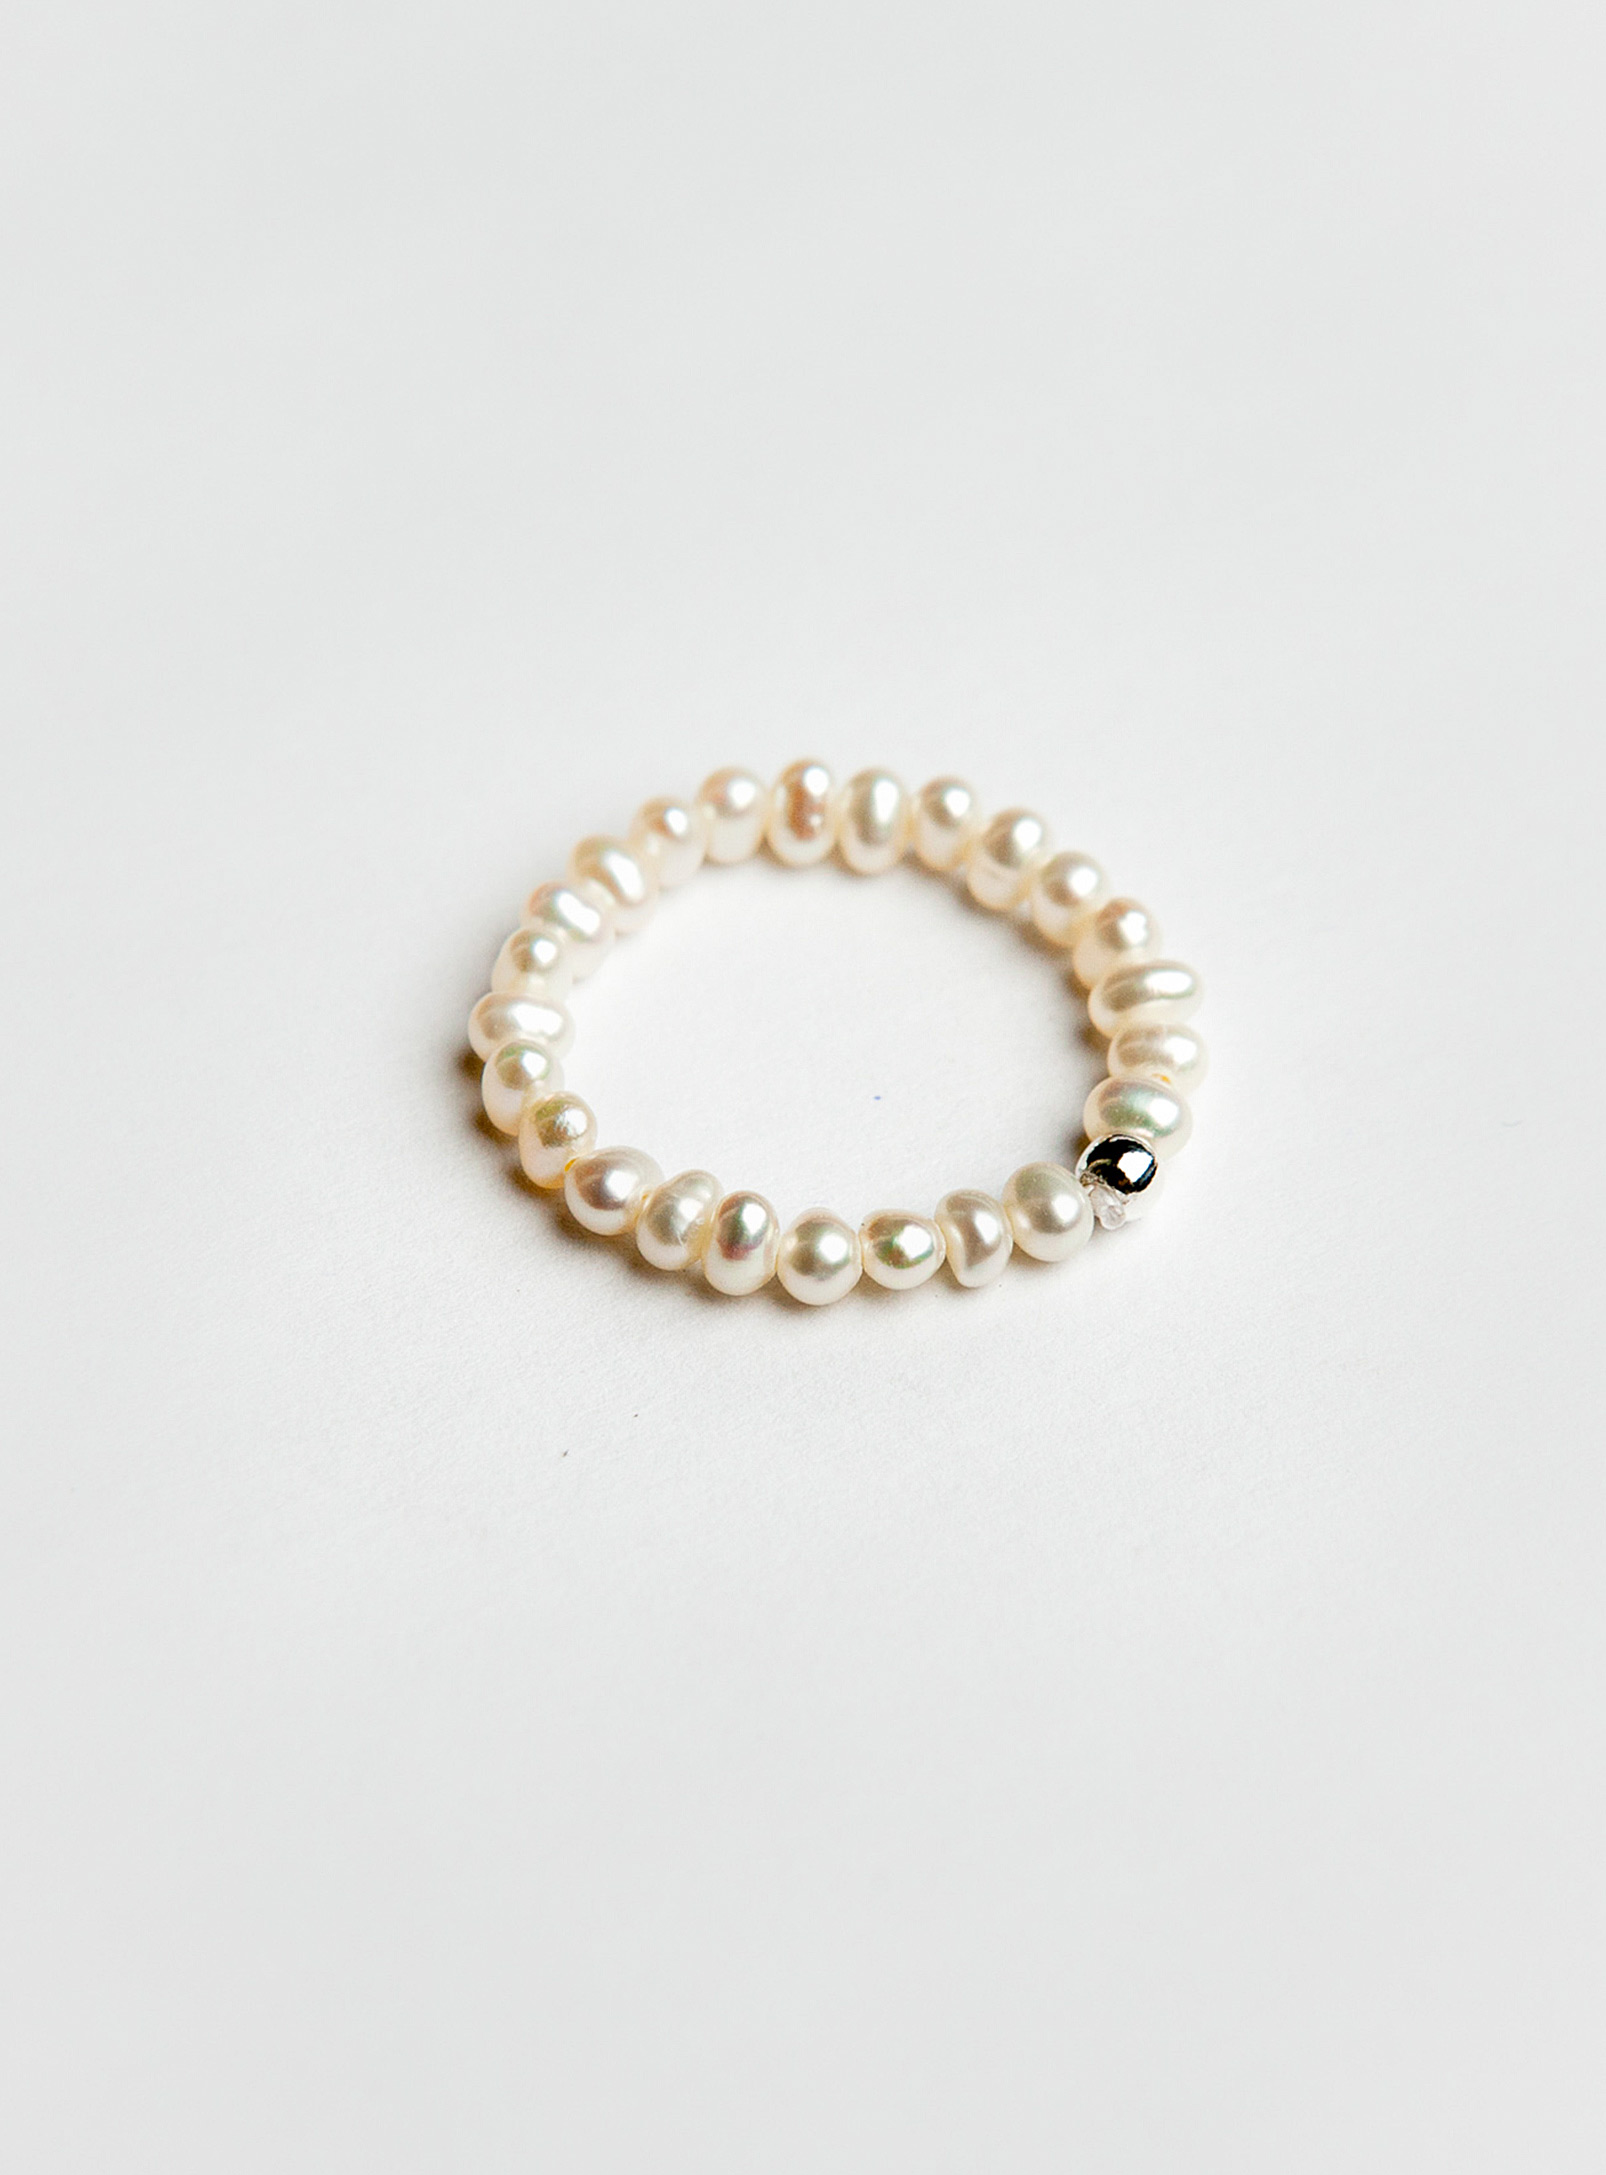 SarahBijoux - Bead and freshwater pearls band